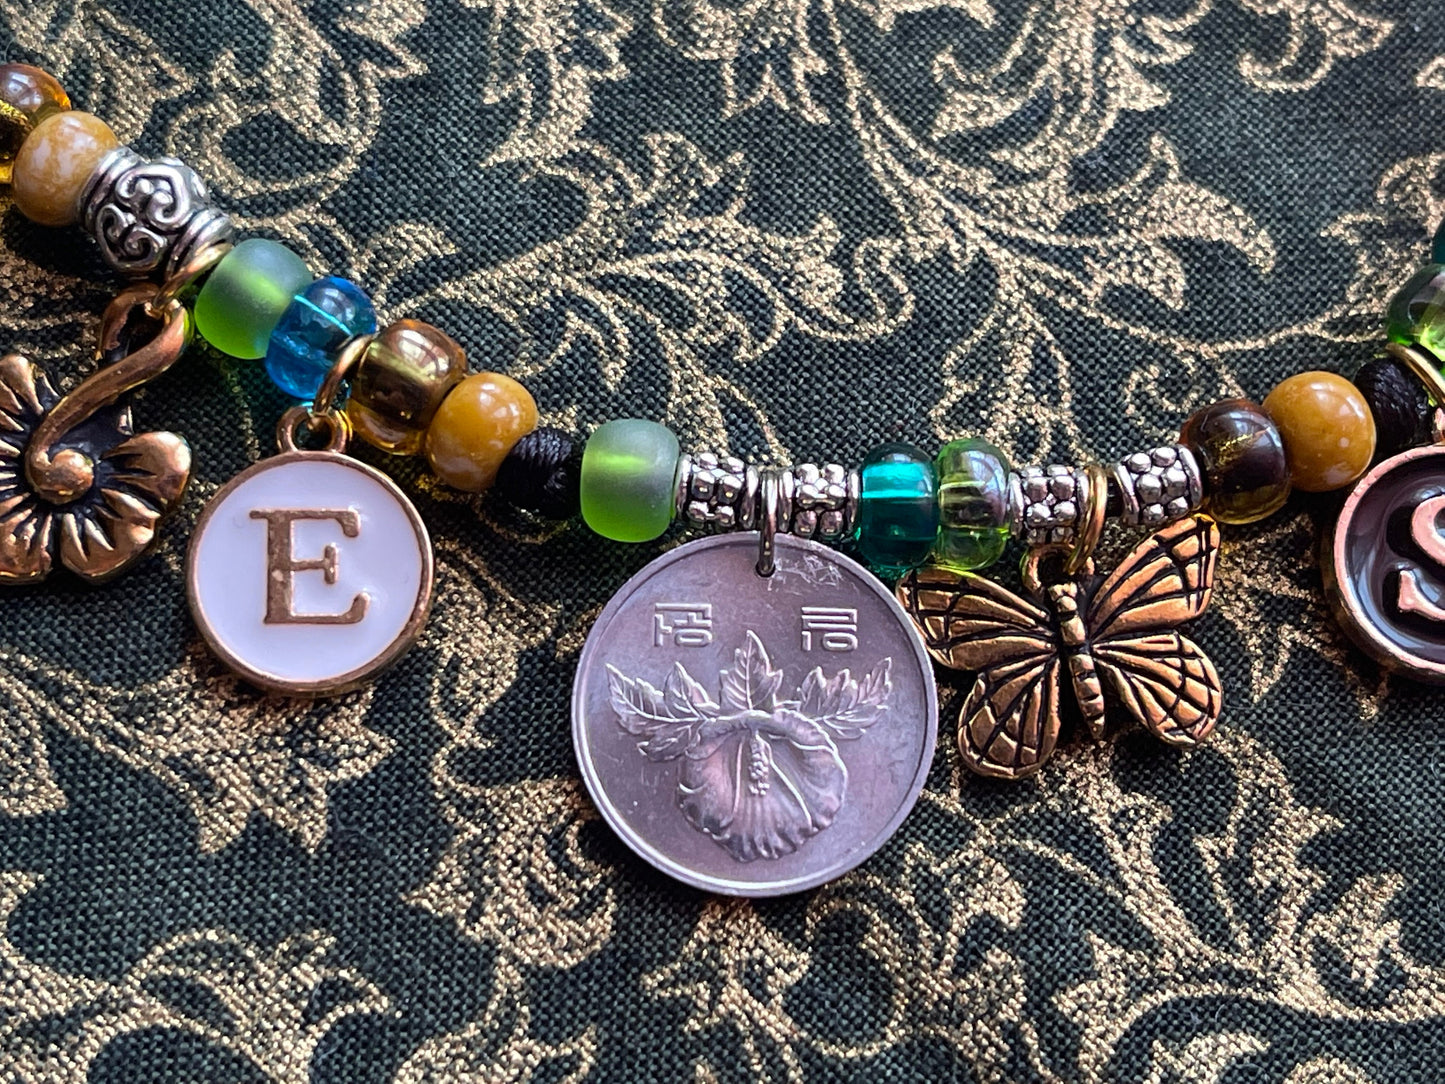 BEES necklace–coins, letter charms: honeybee-butterfly-hummingbird, flower coins–lotus orchid rose–bee charms–adjustable satin cord bead kit